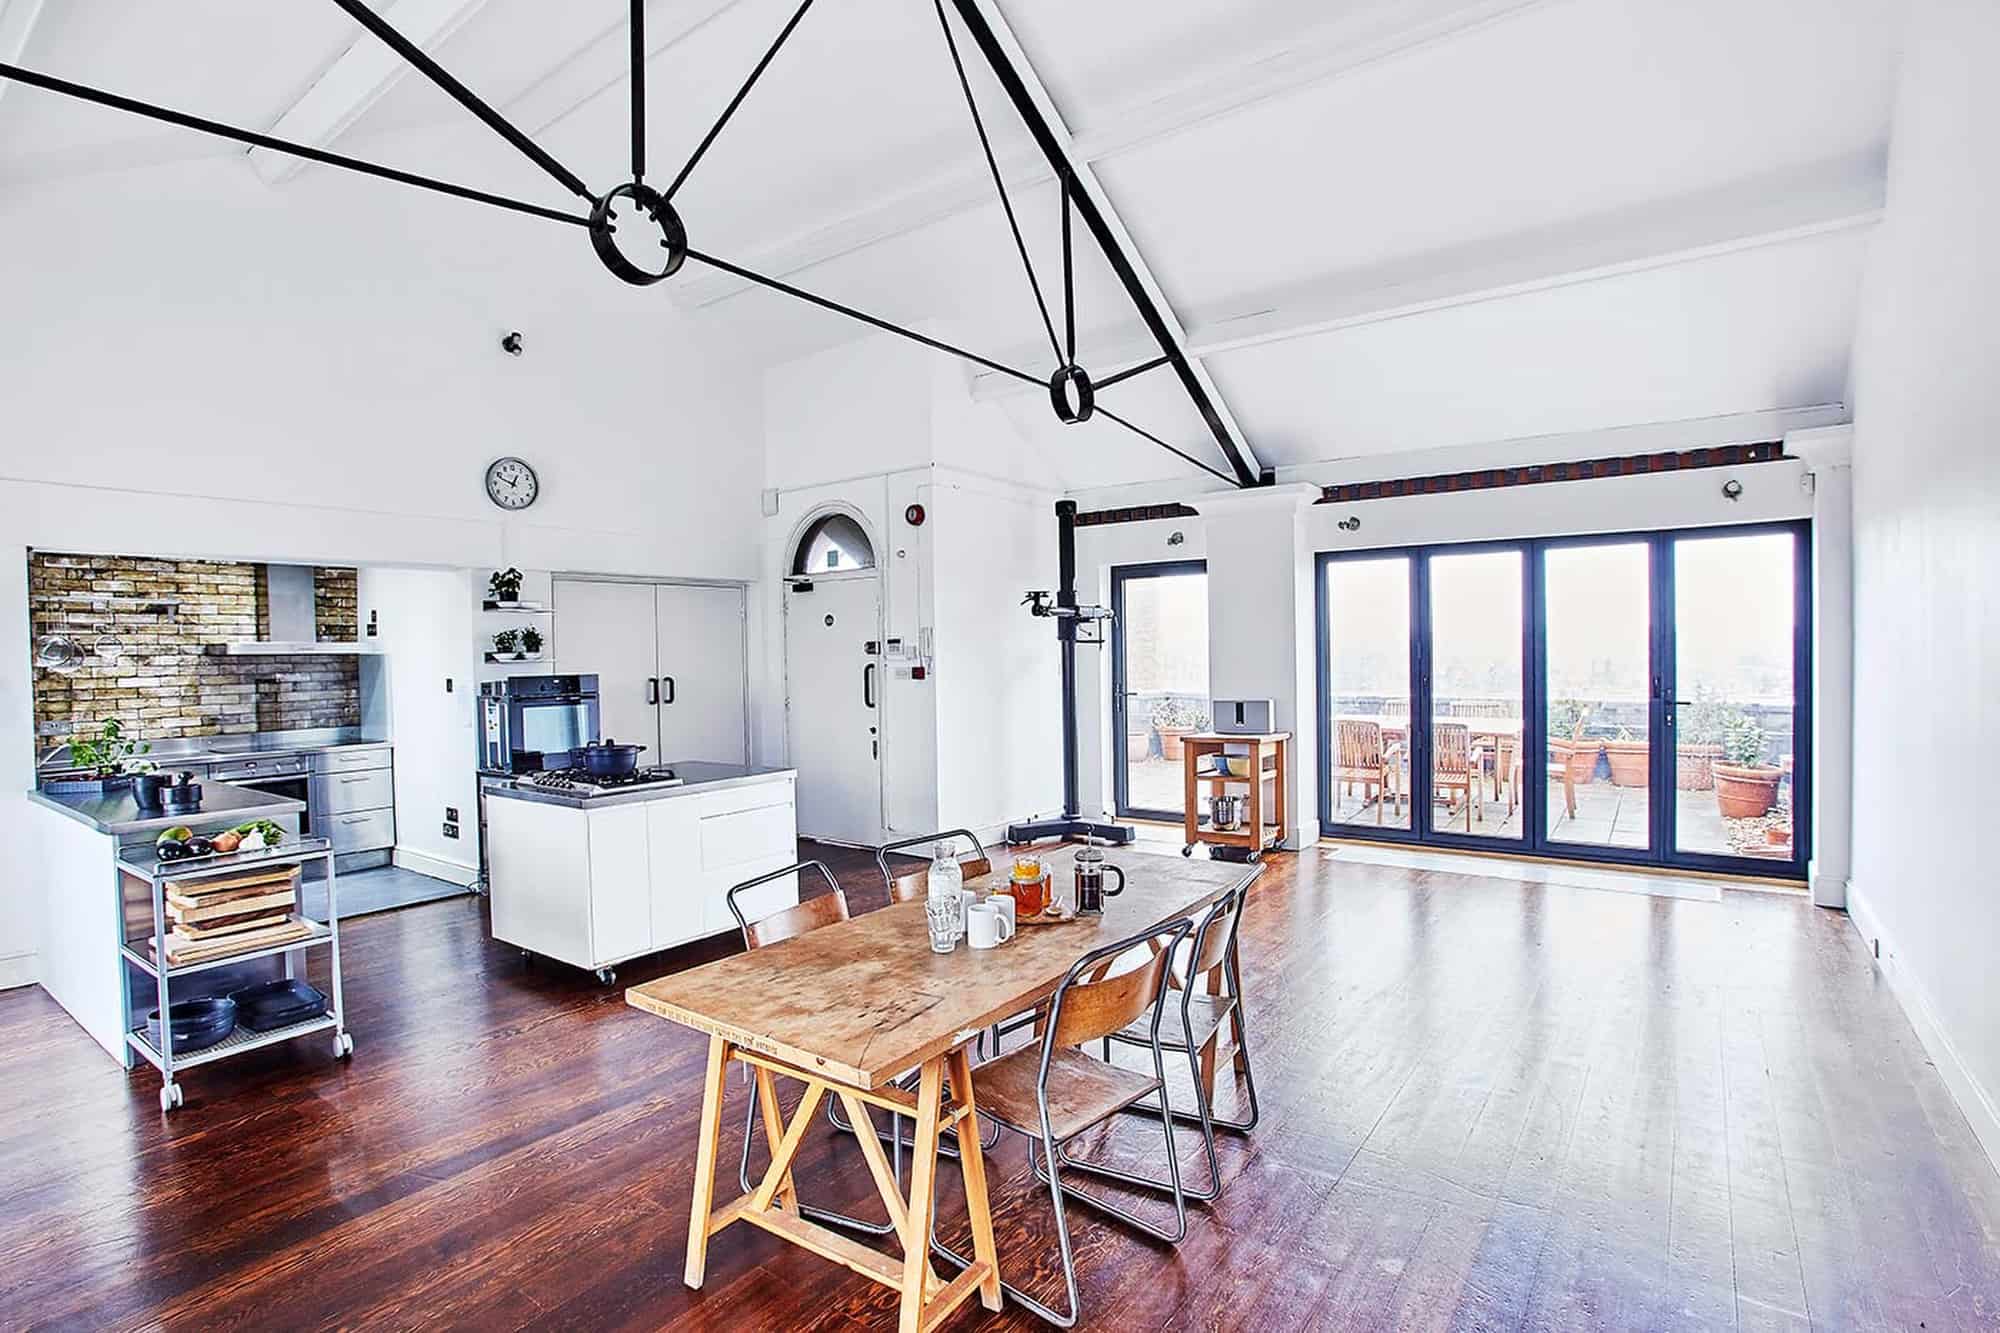 Warple Studio Three W3 - A white kitchen studio with large roof terrace - The Location Guys